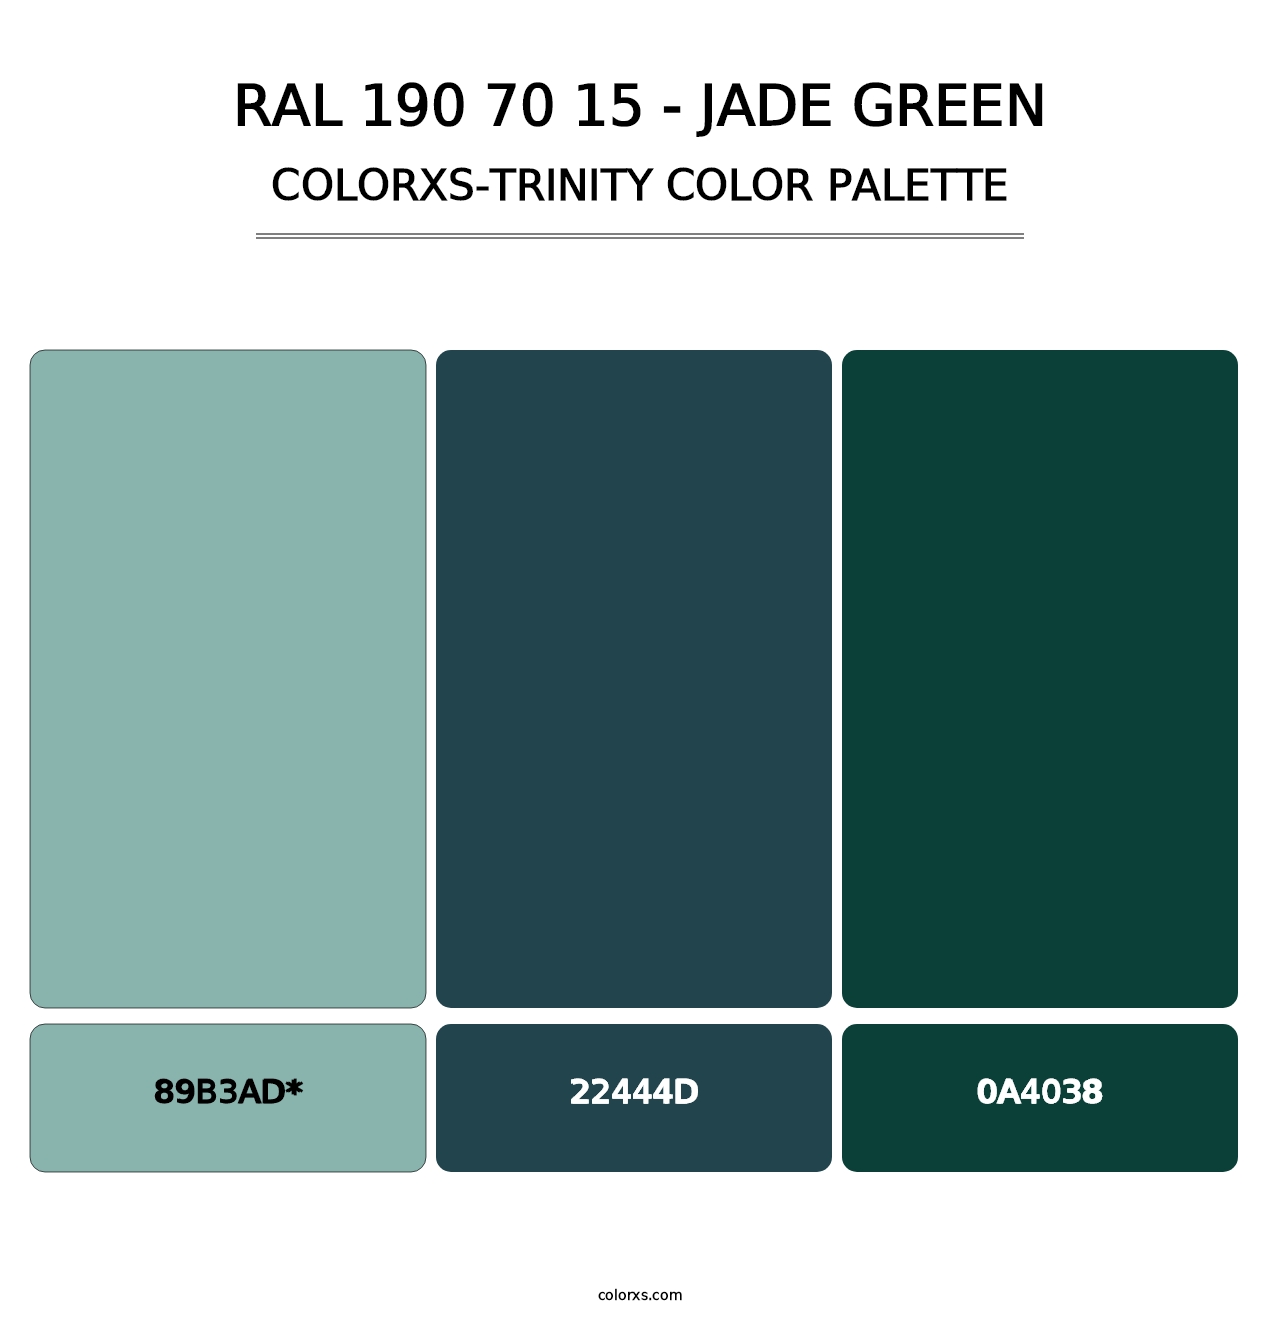 RAL 190 70 15 - Jade Green - Colorxs Trinity Palette